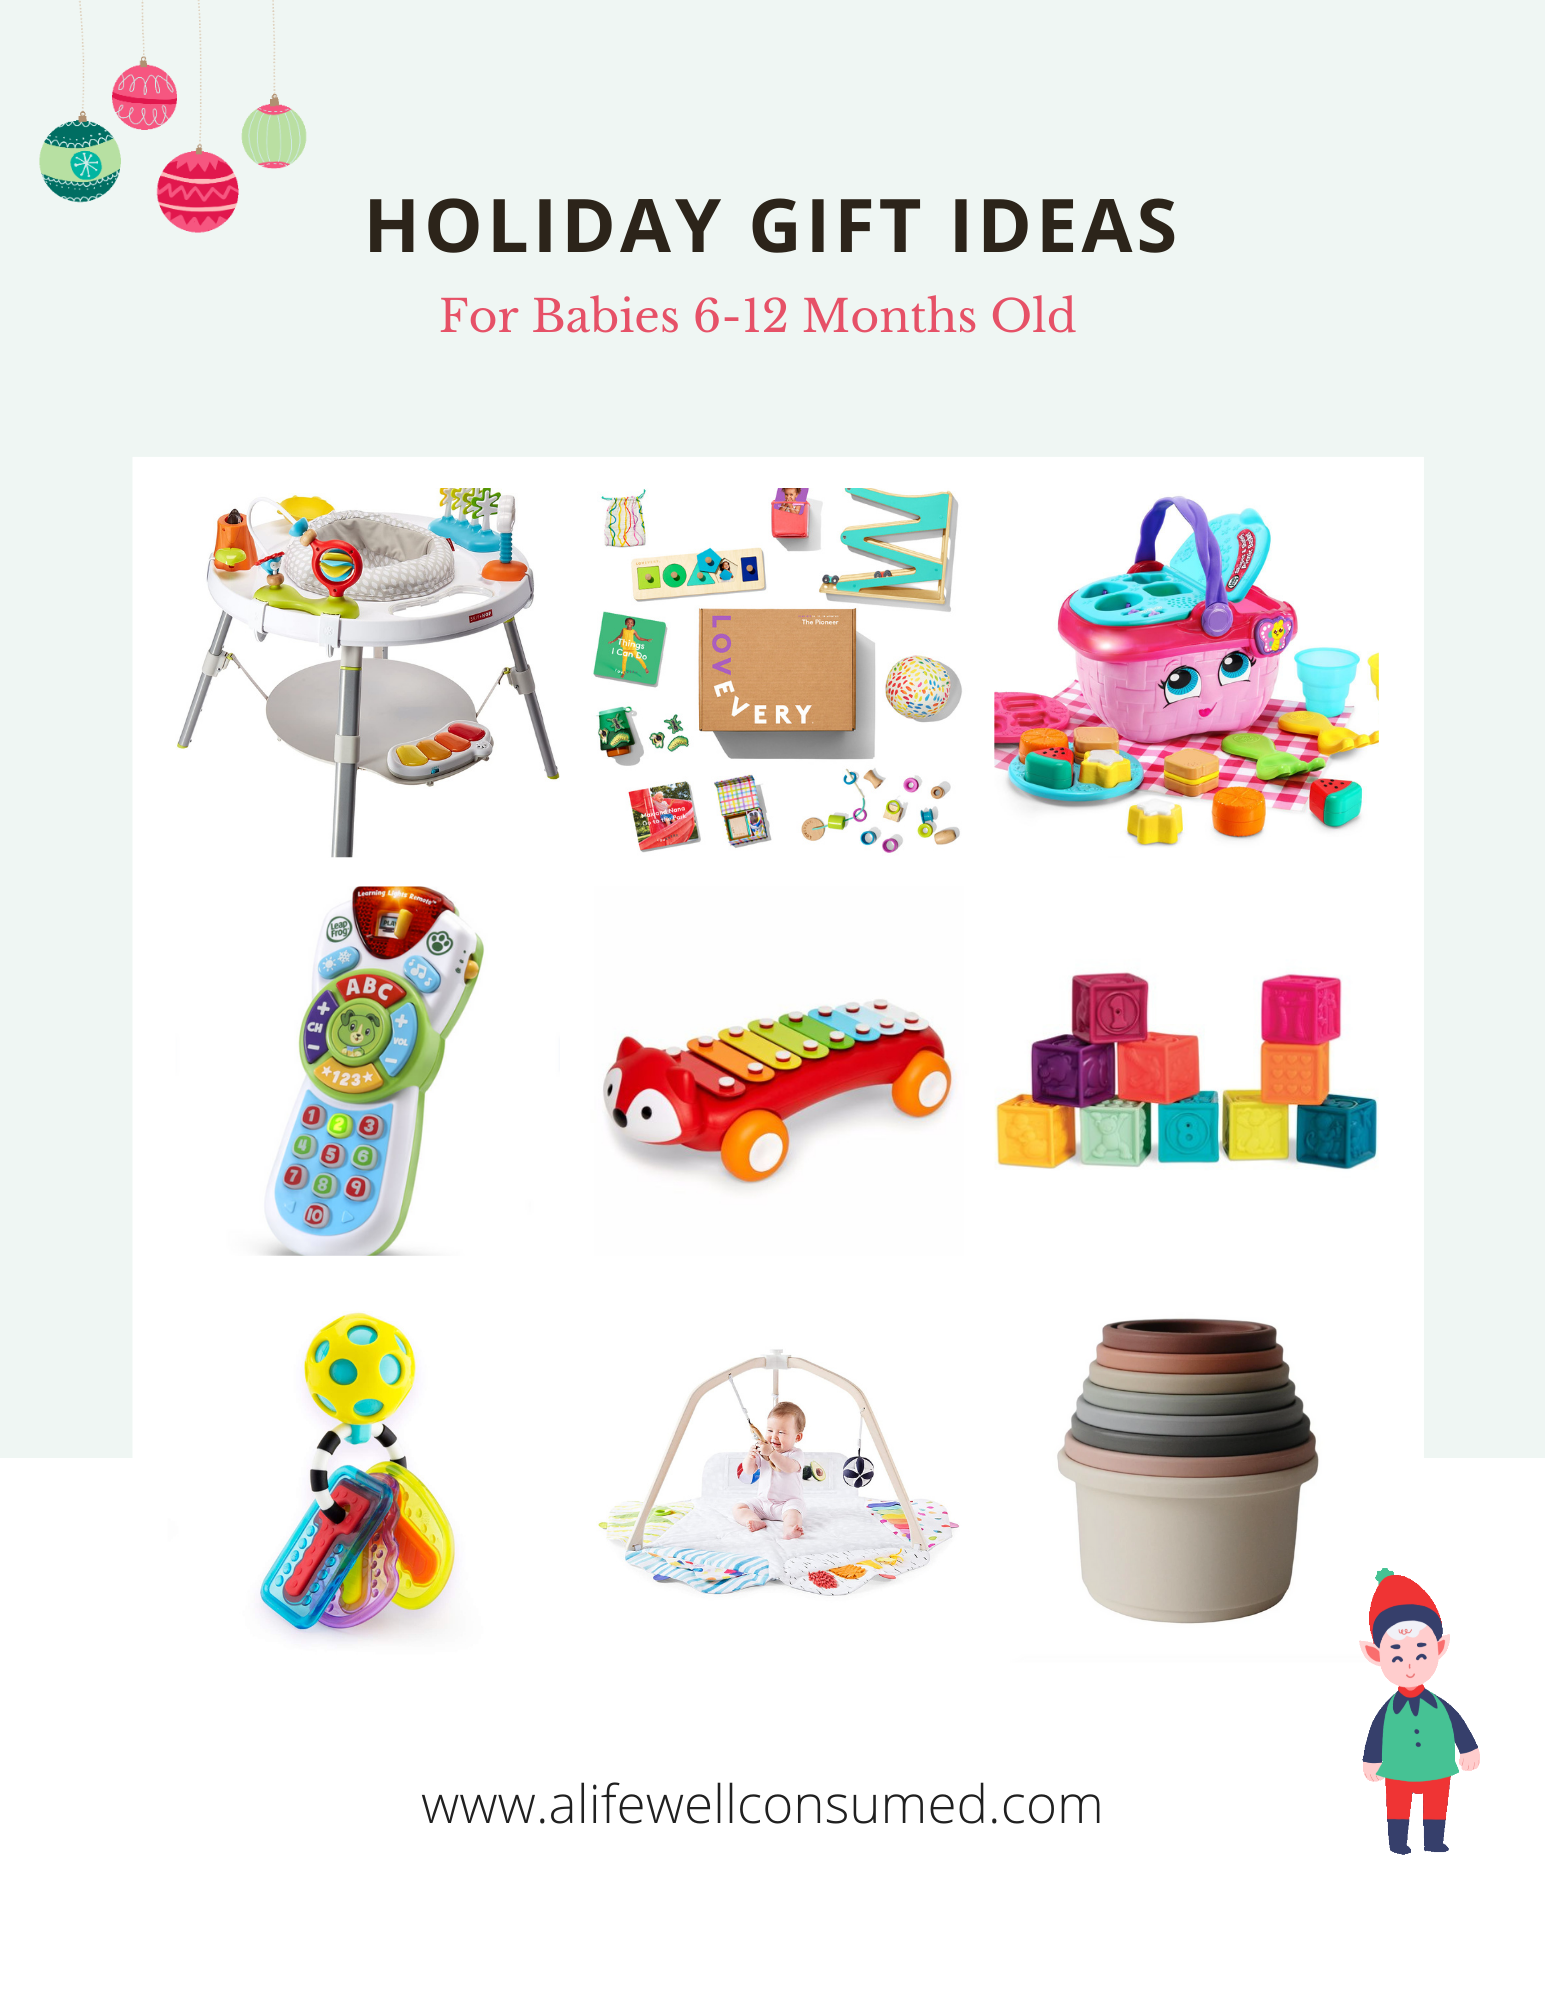 Top 10 Best Gift Ideas For Babies 6-12 Months